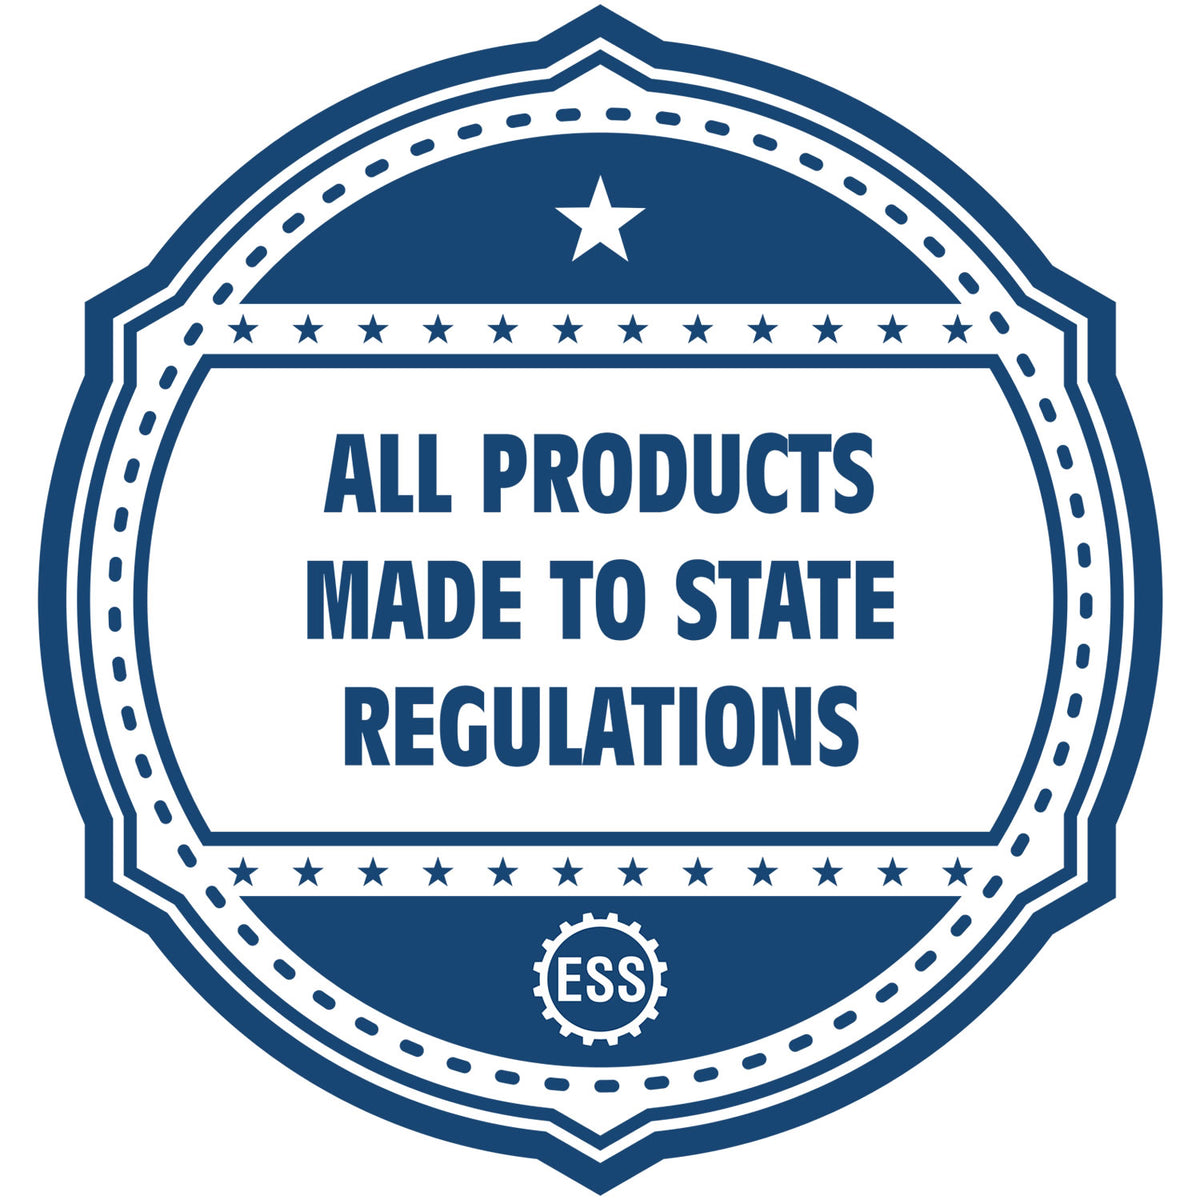 An icon or badge element for the Handheld Minnesota Land Surveyor Seal showing that this product is made in compliance with state regulations.